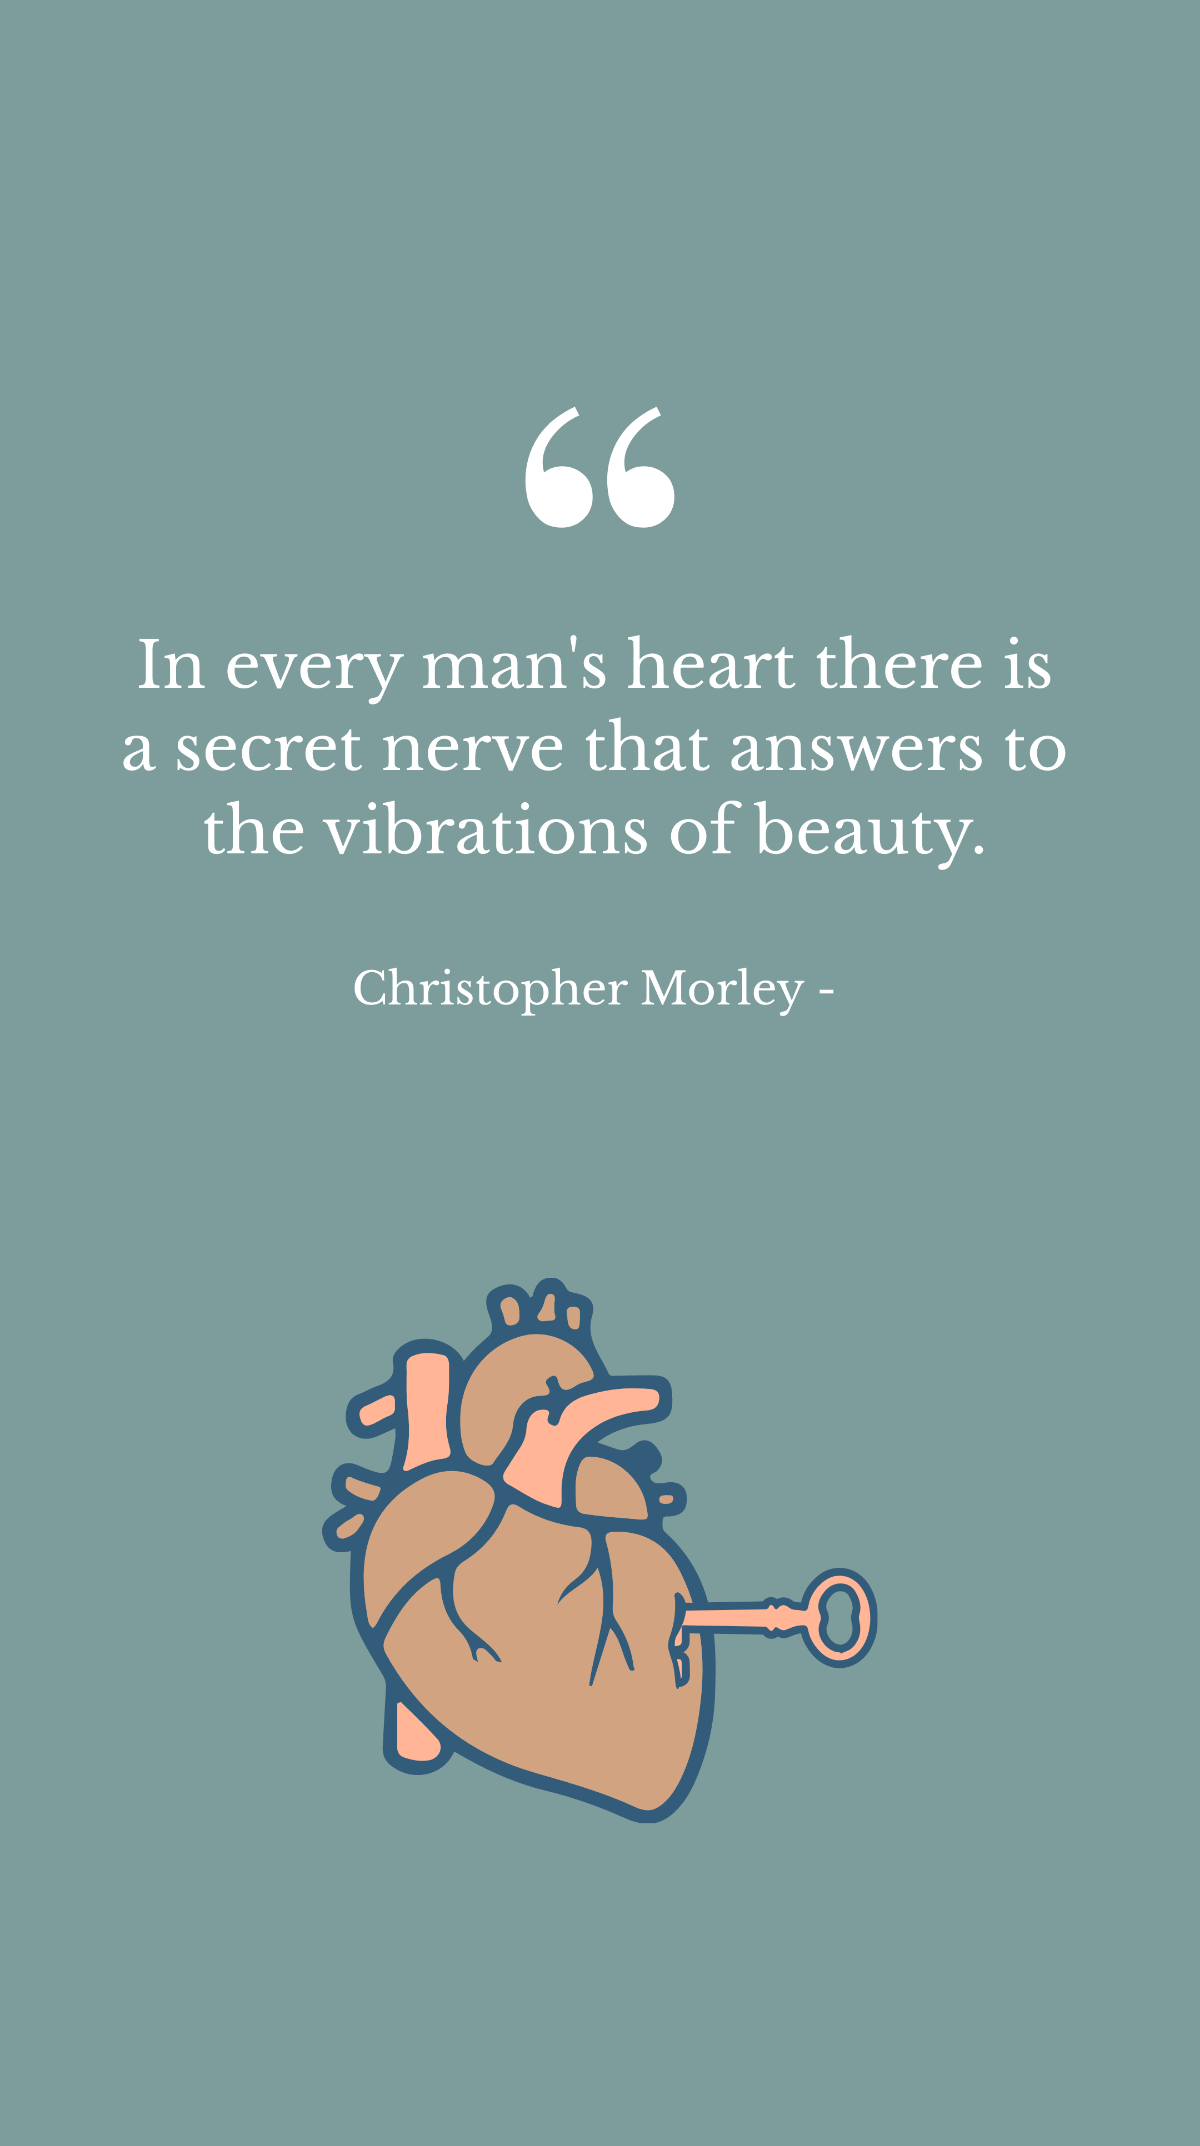 Christopher Morley - In every man's heart there is a secret nerve that answers to the vibrations of beauty.